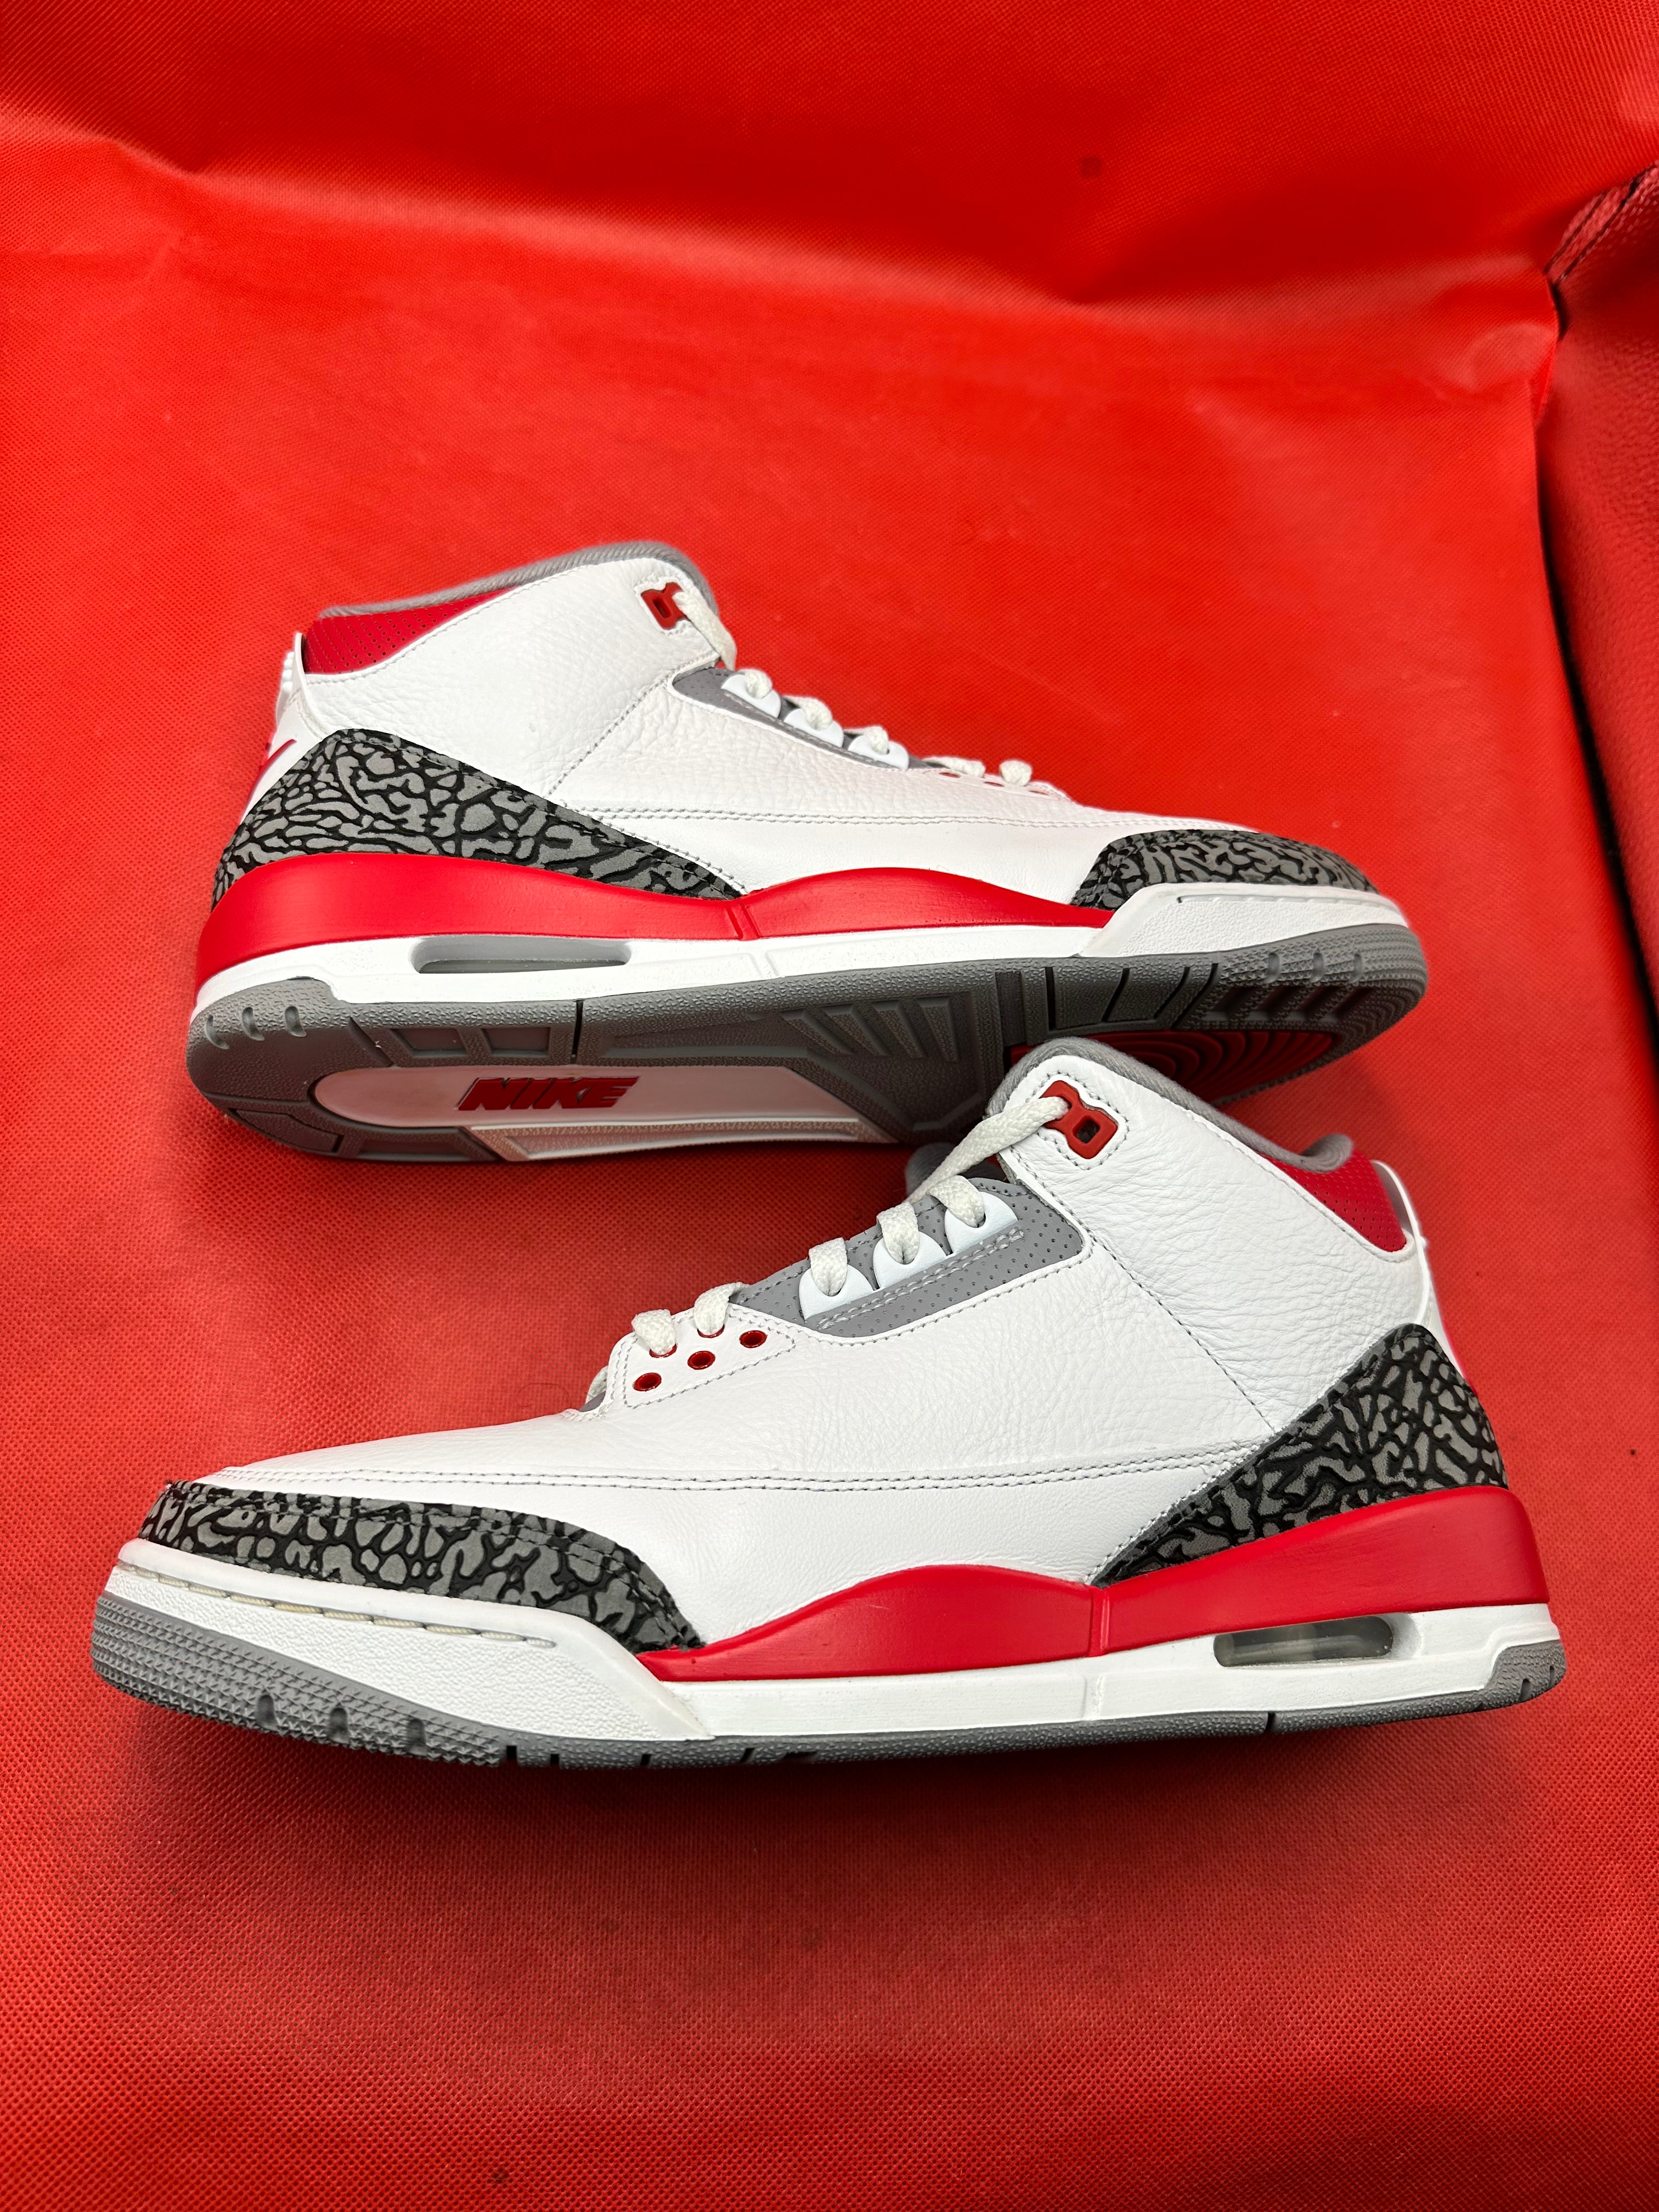 Fire Red 3s size 11